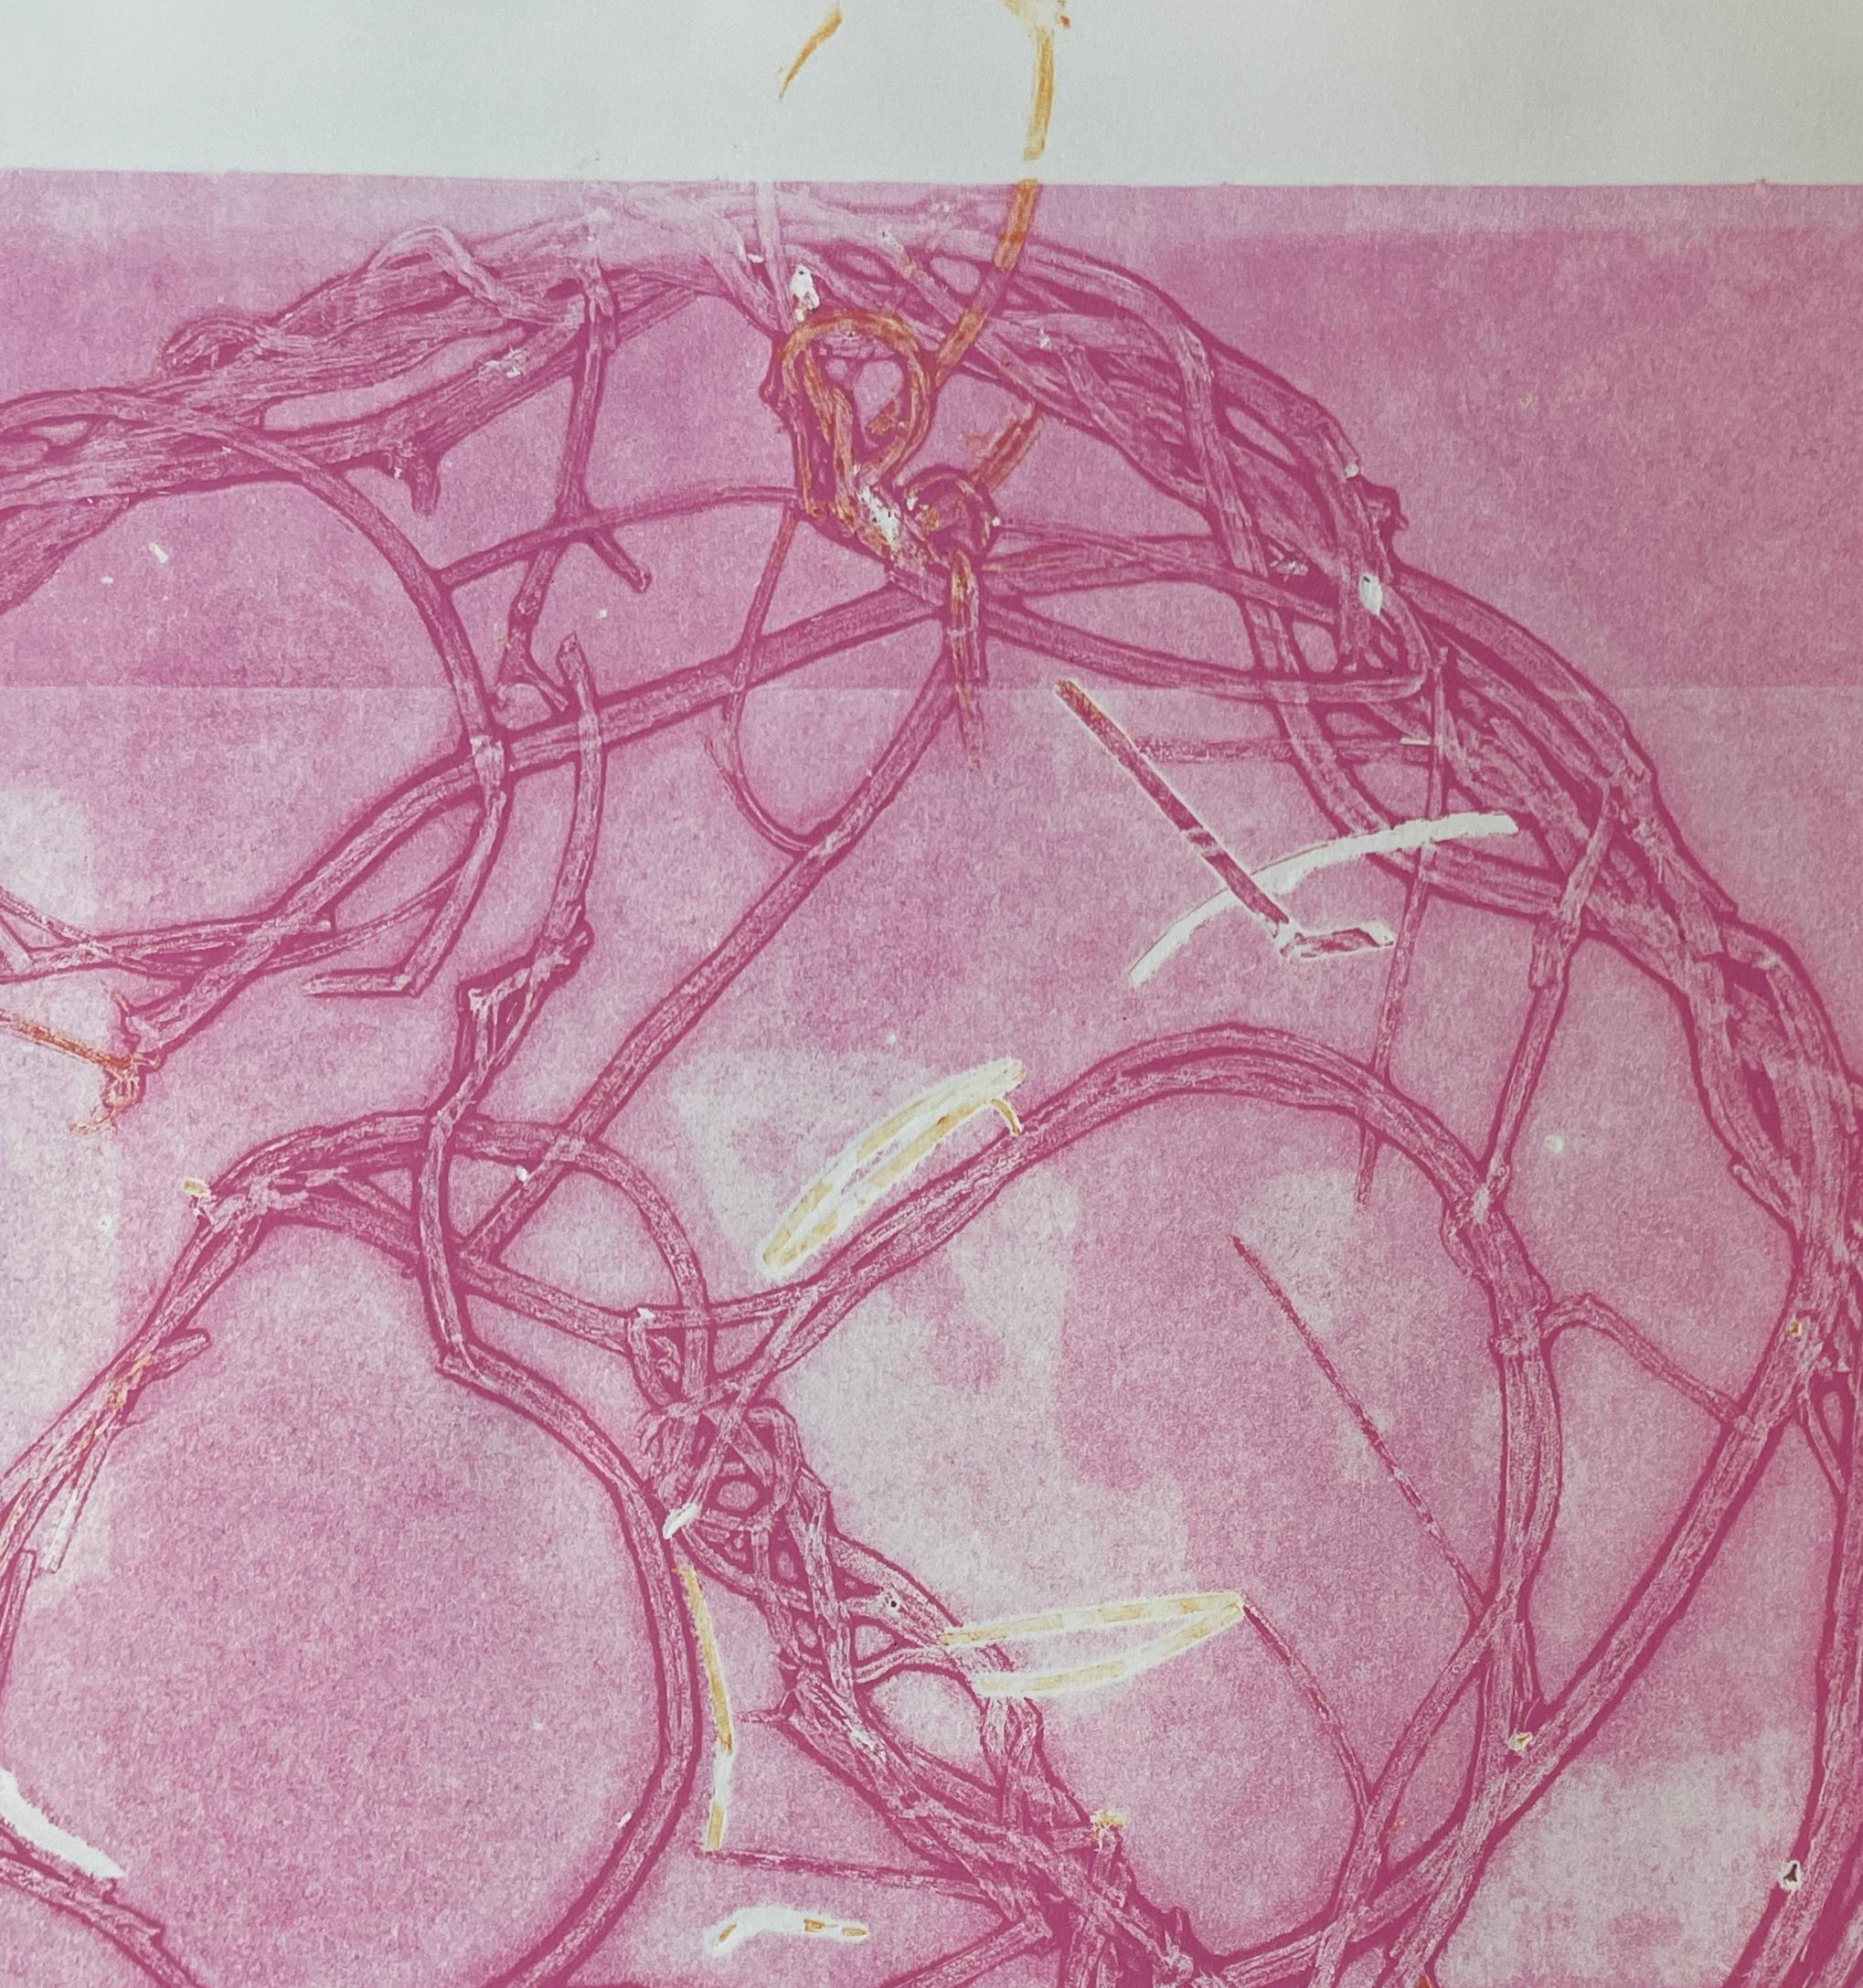 Pink Nest: one-of-a-kind monoprint of abstract bird nest w/ orange & white lines - Abstract Painting by Deirdre Murphy